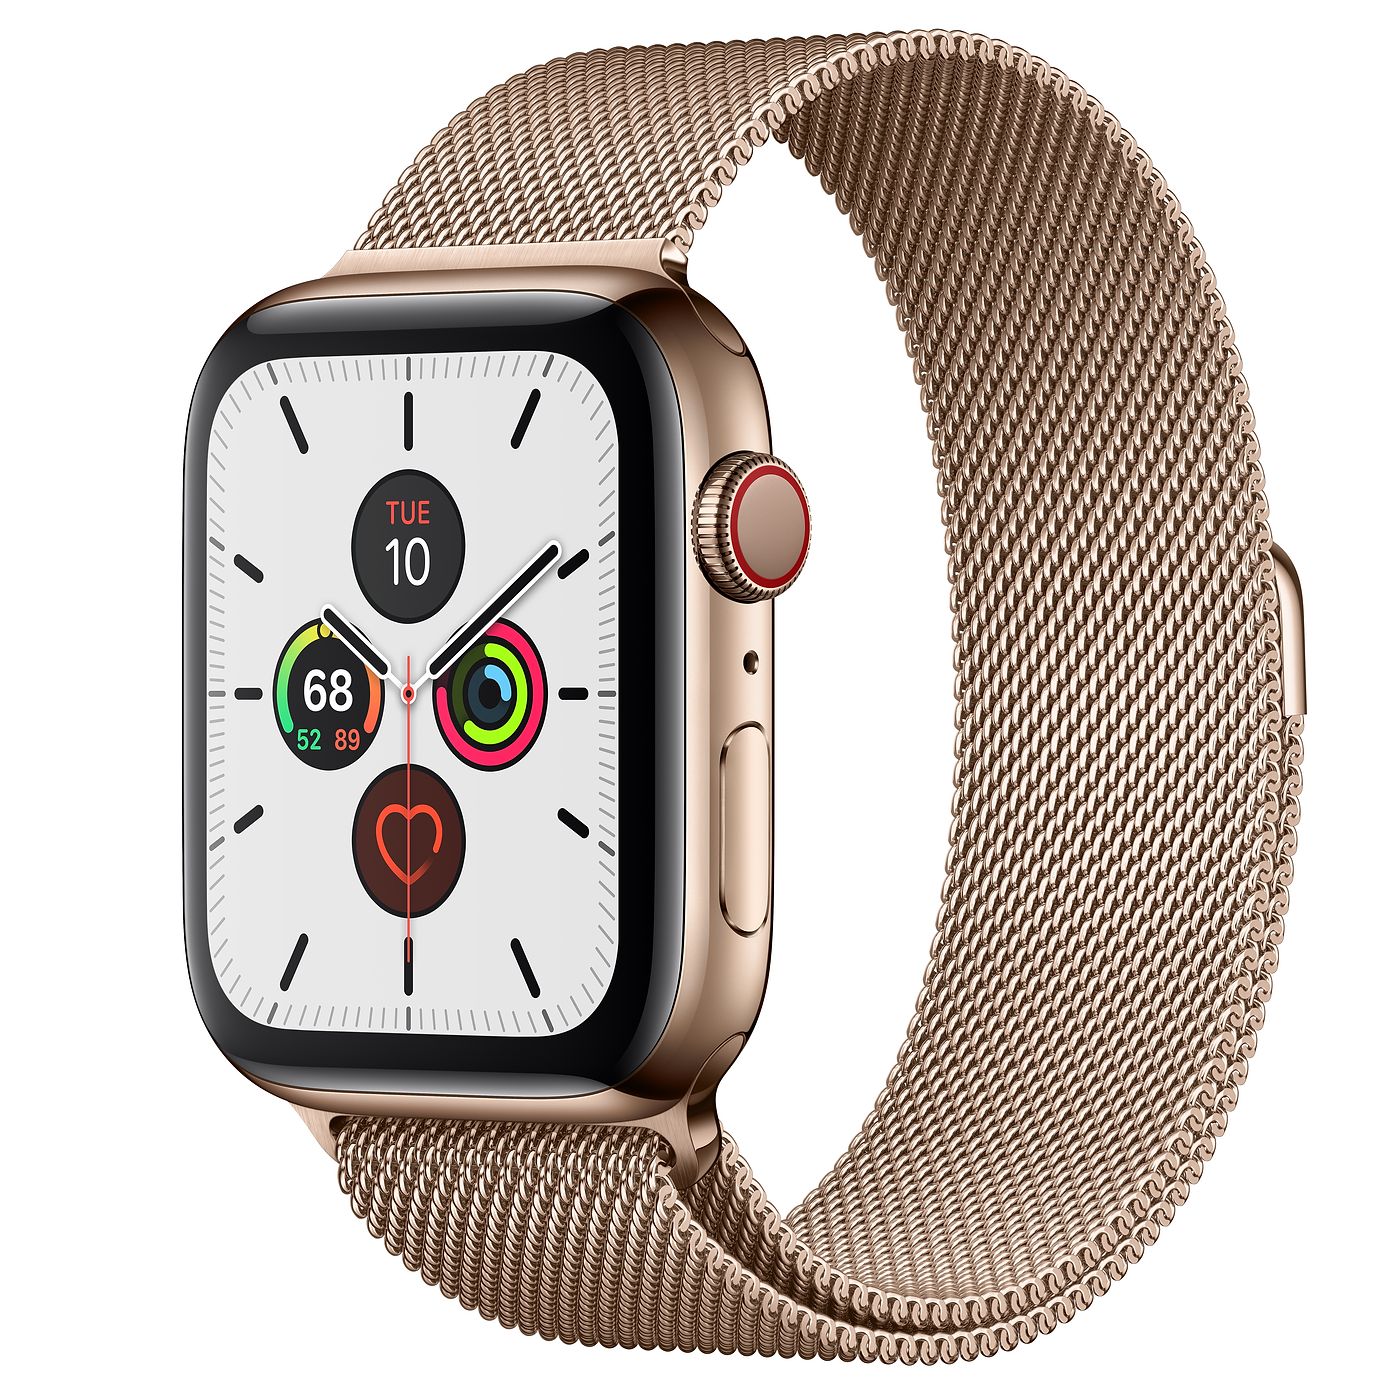 Apple Watch Series 5 GPS + Cellular 44mm Gold Stainless Steel with